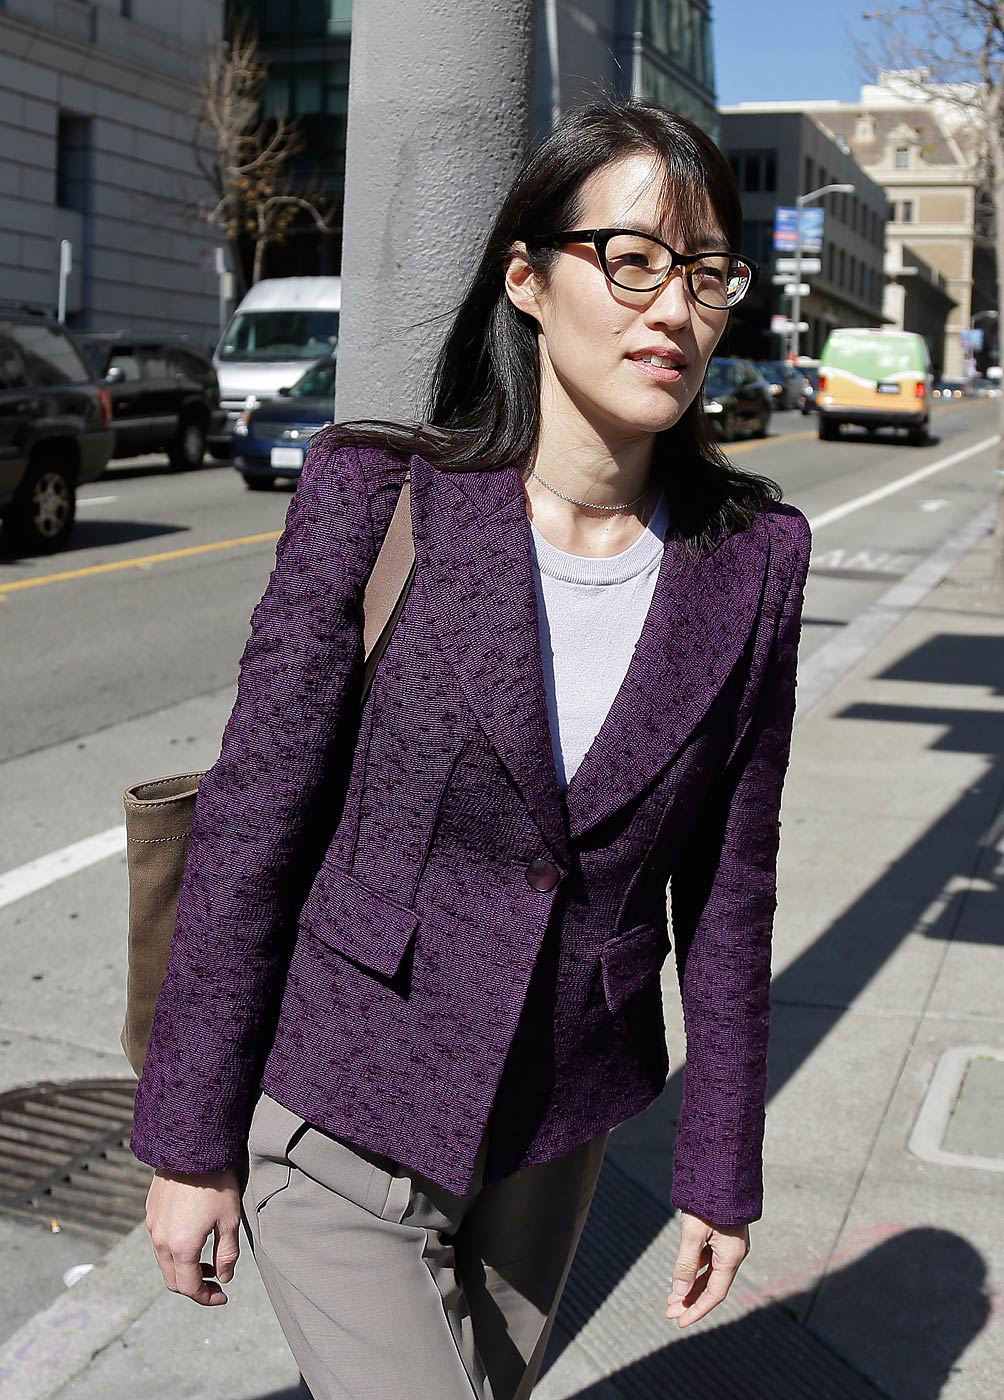 Ellen Pao leaves the Civic Center Courthouse on Feb. 24, 2015, in San Francisco, Calif. (Eric Risberg—AP)